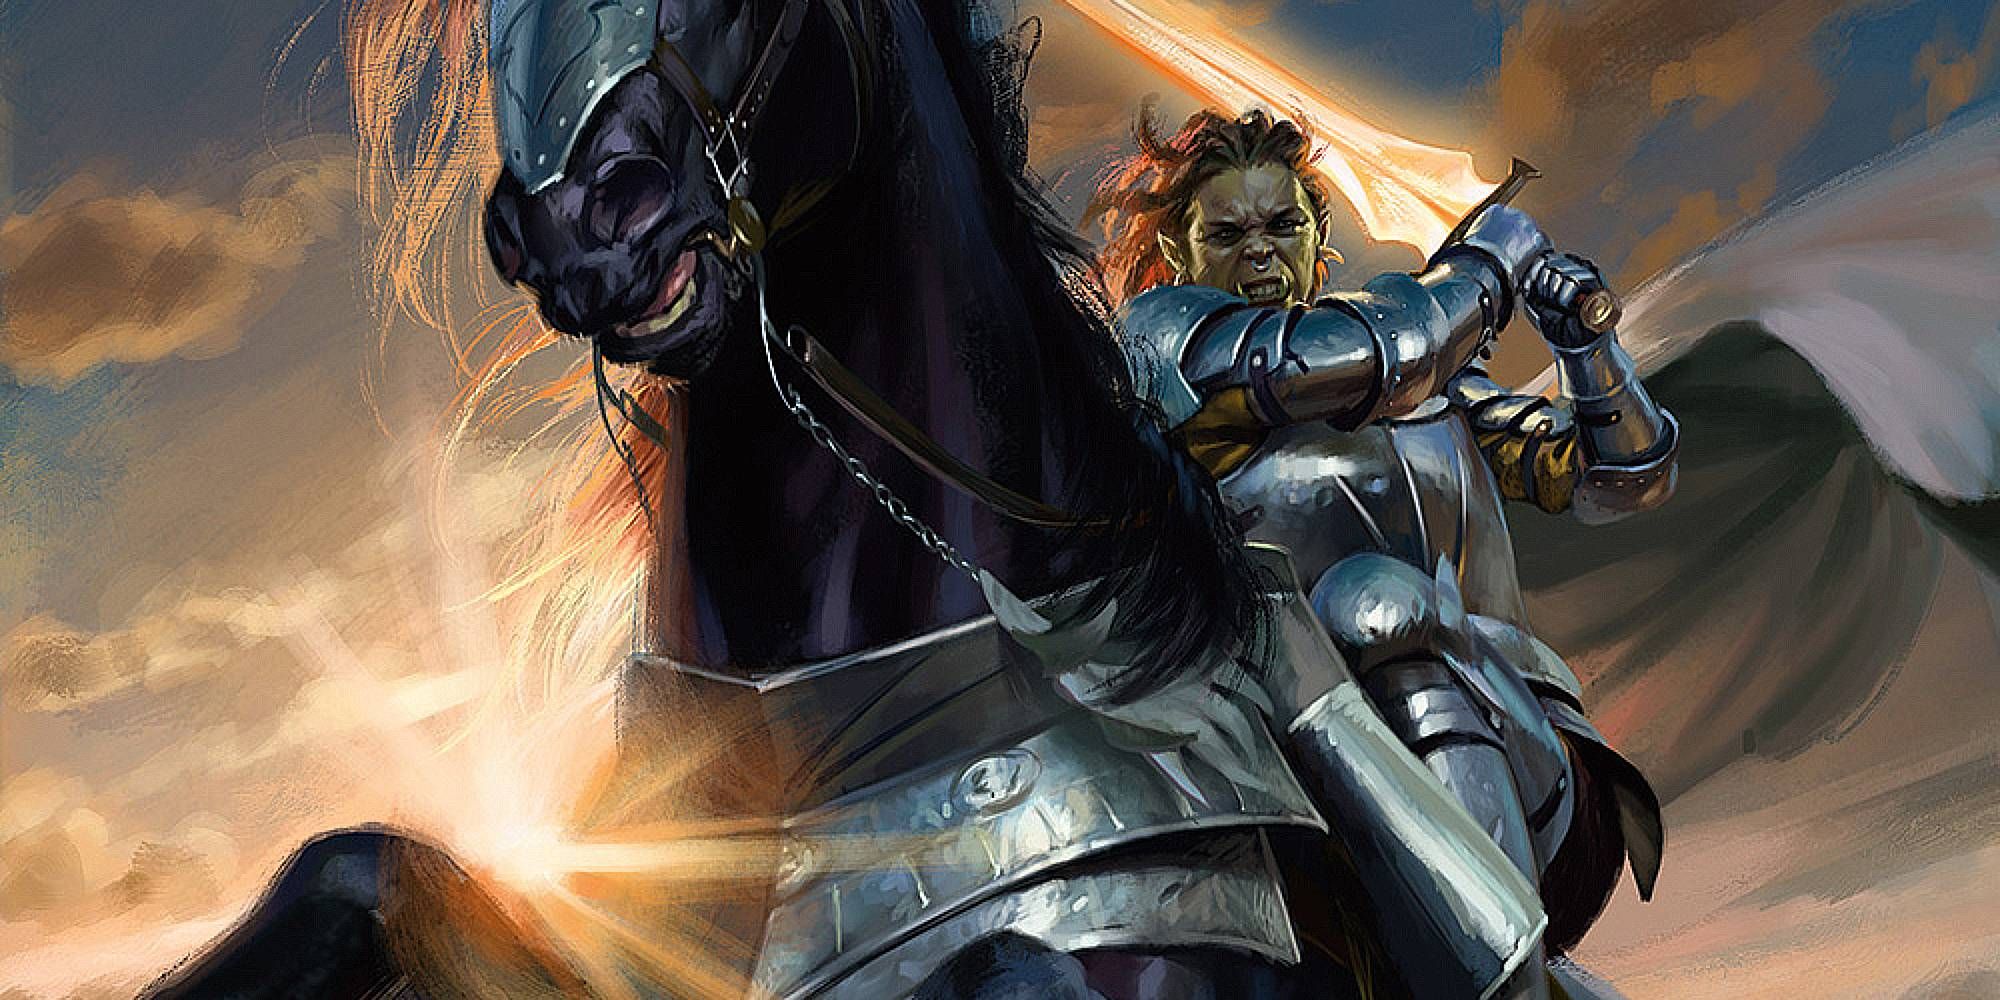 An orc woman in plate armour holds a blazing sword as she rides a dark horse